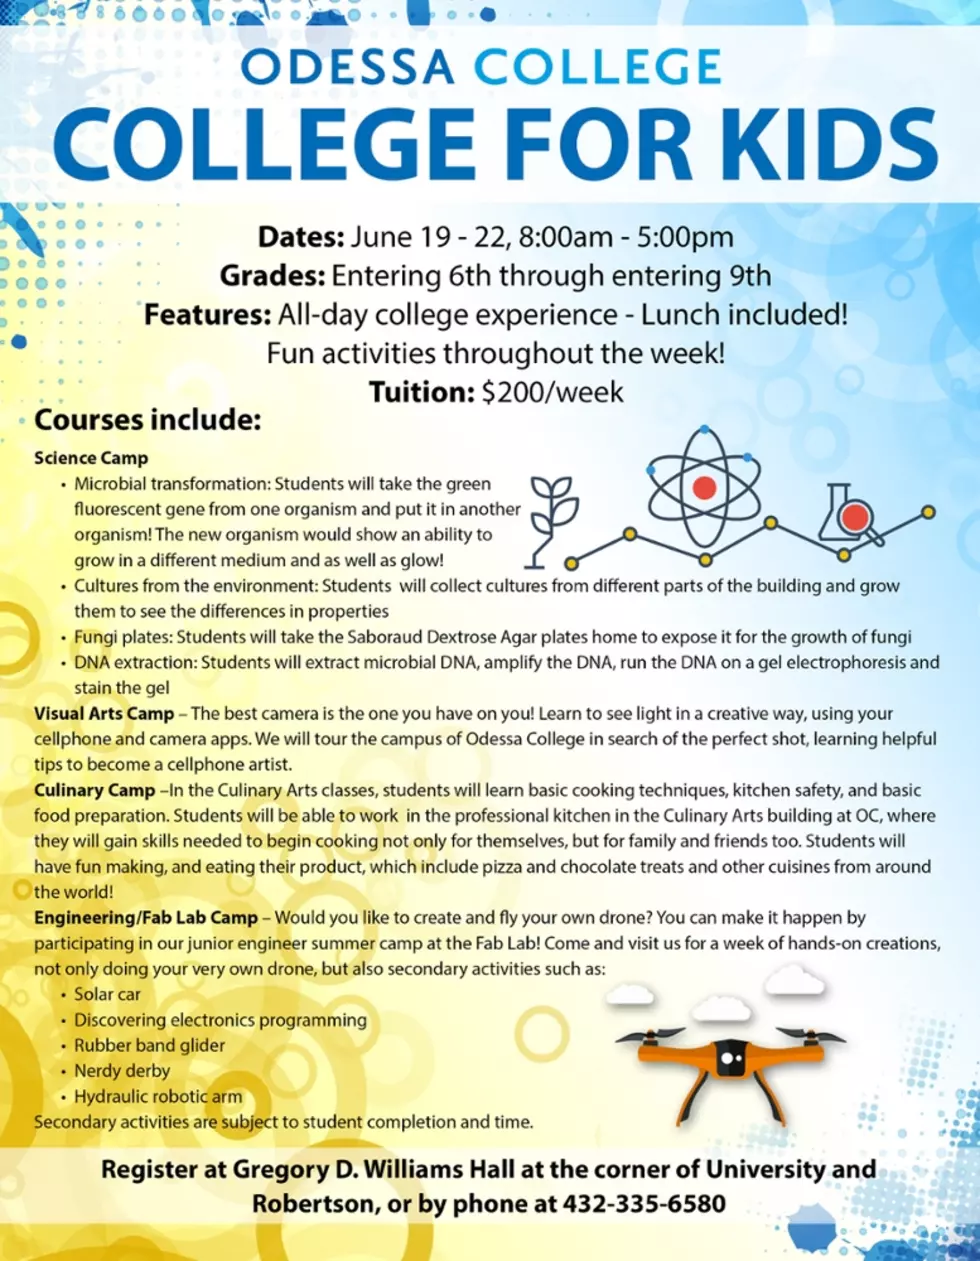 Odessa College Offers Summer College For Kids